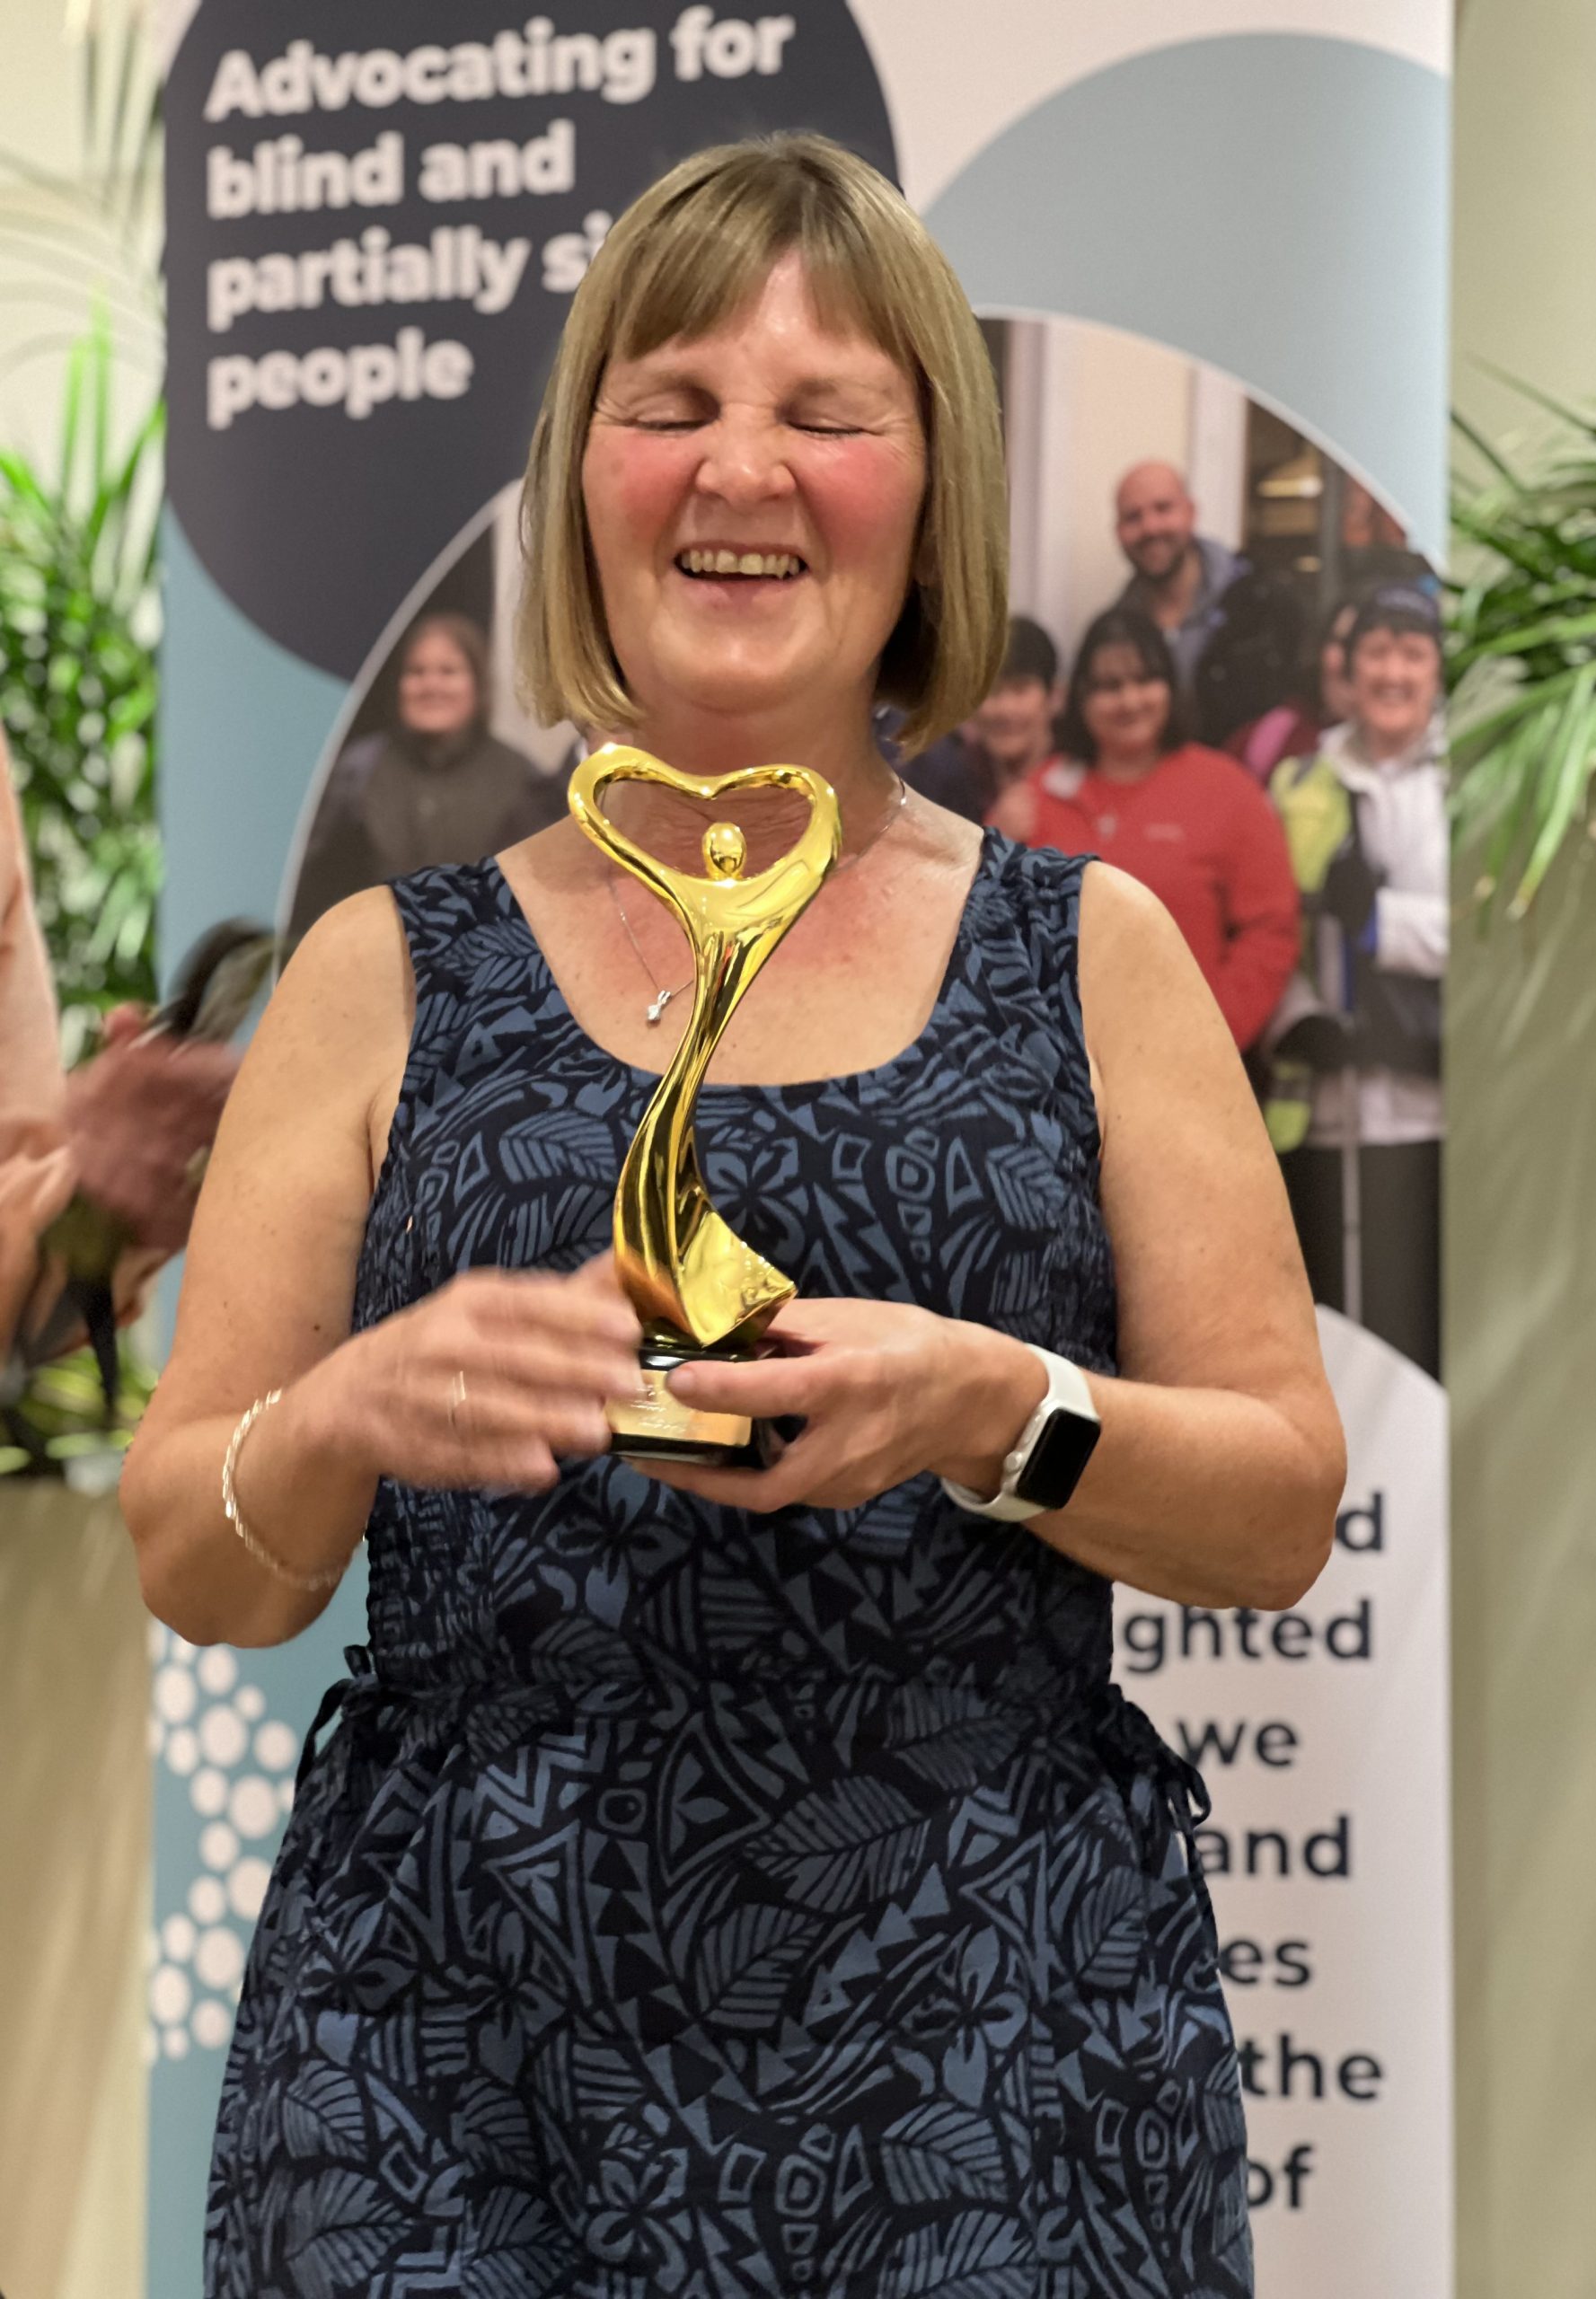 Portrait image of Julie Stephens, Gloucestershire SLC member. Julie is holding her award for 'Individual of the year', with a giant smile on her face.